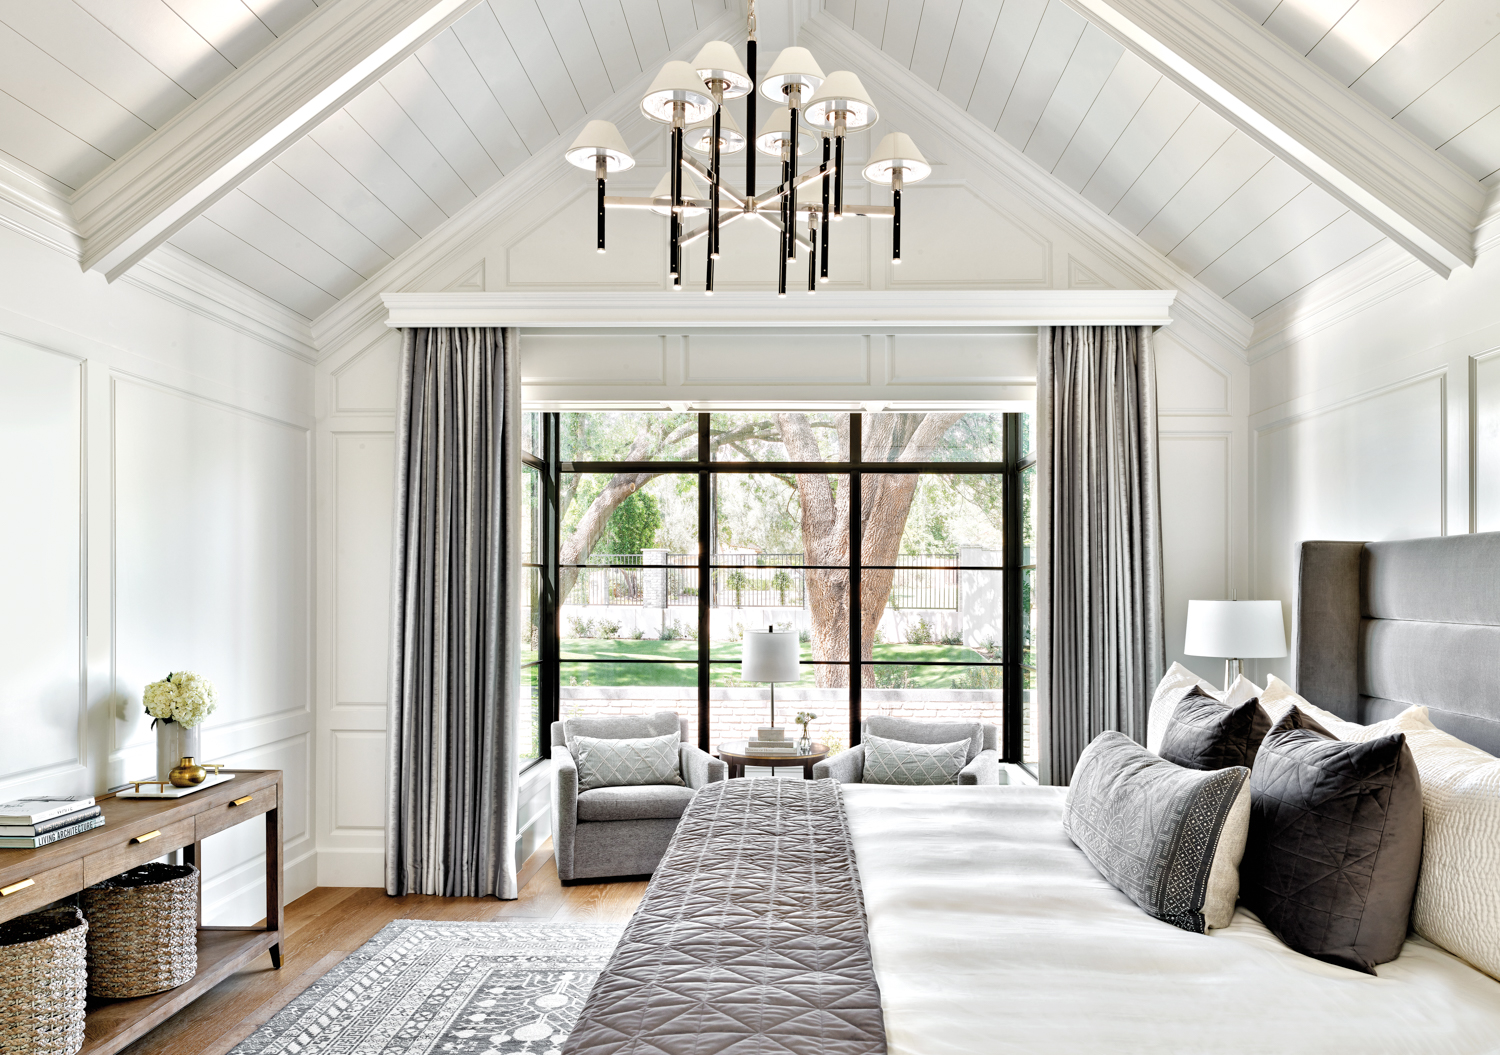 A gray-and-white bedroom with vaulted...